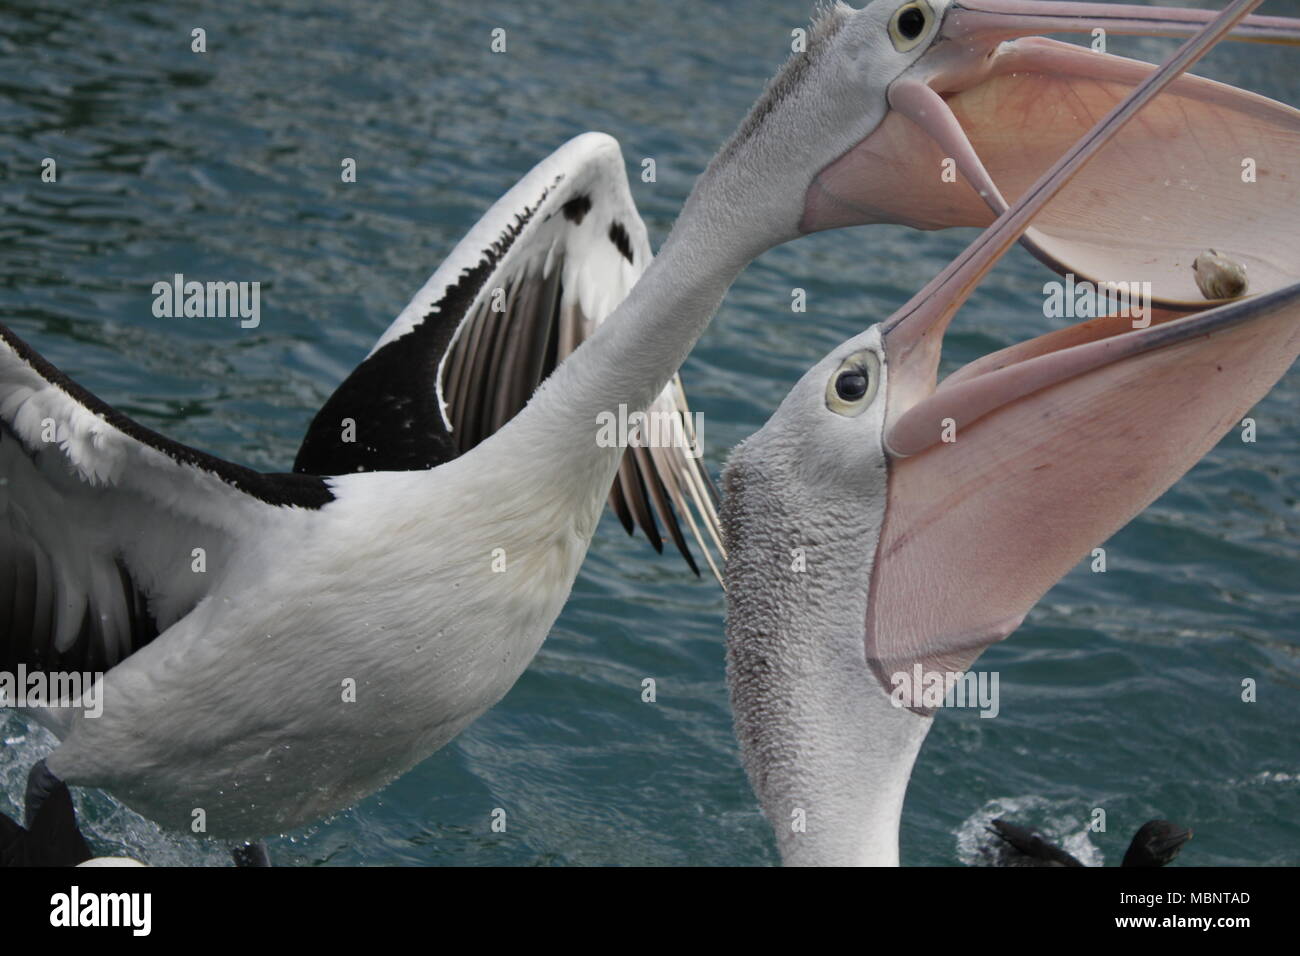 An action shot of some pelicans being fed in the canals in Mooloolaba, Queensland, Australia. Stock Photo